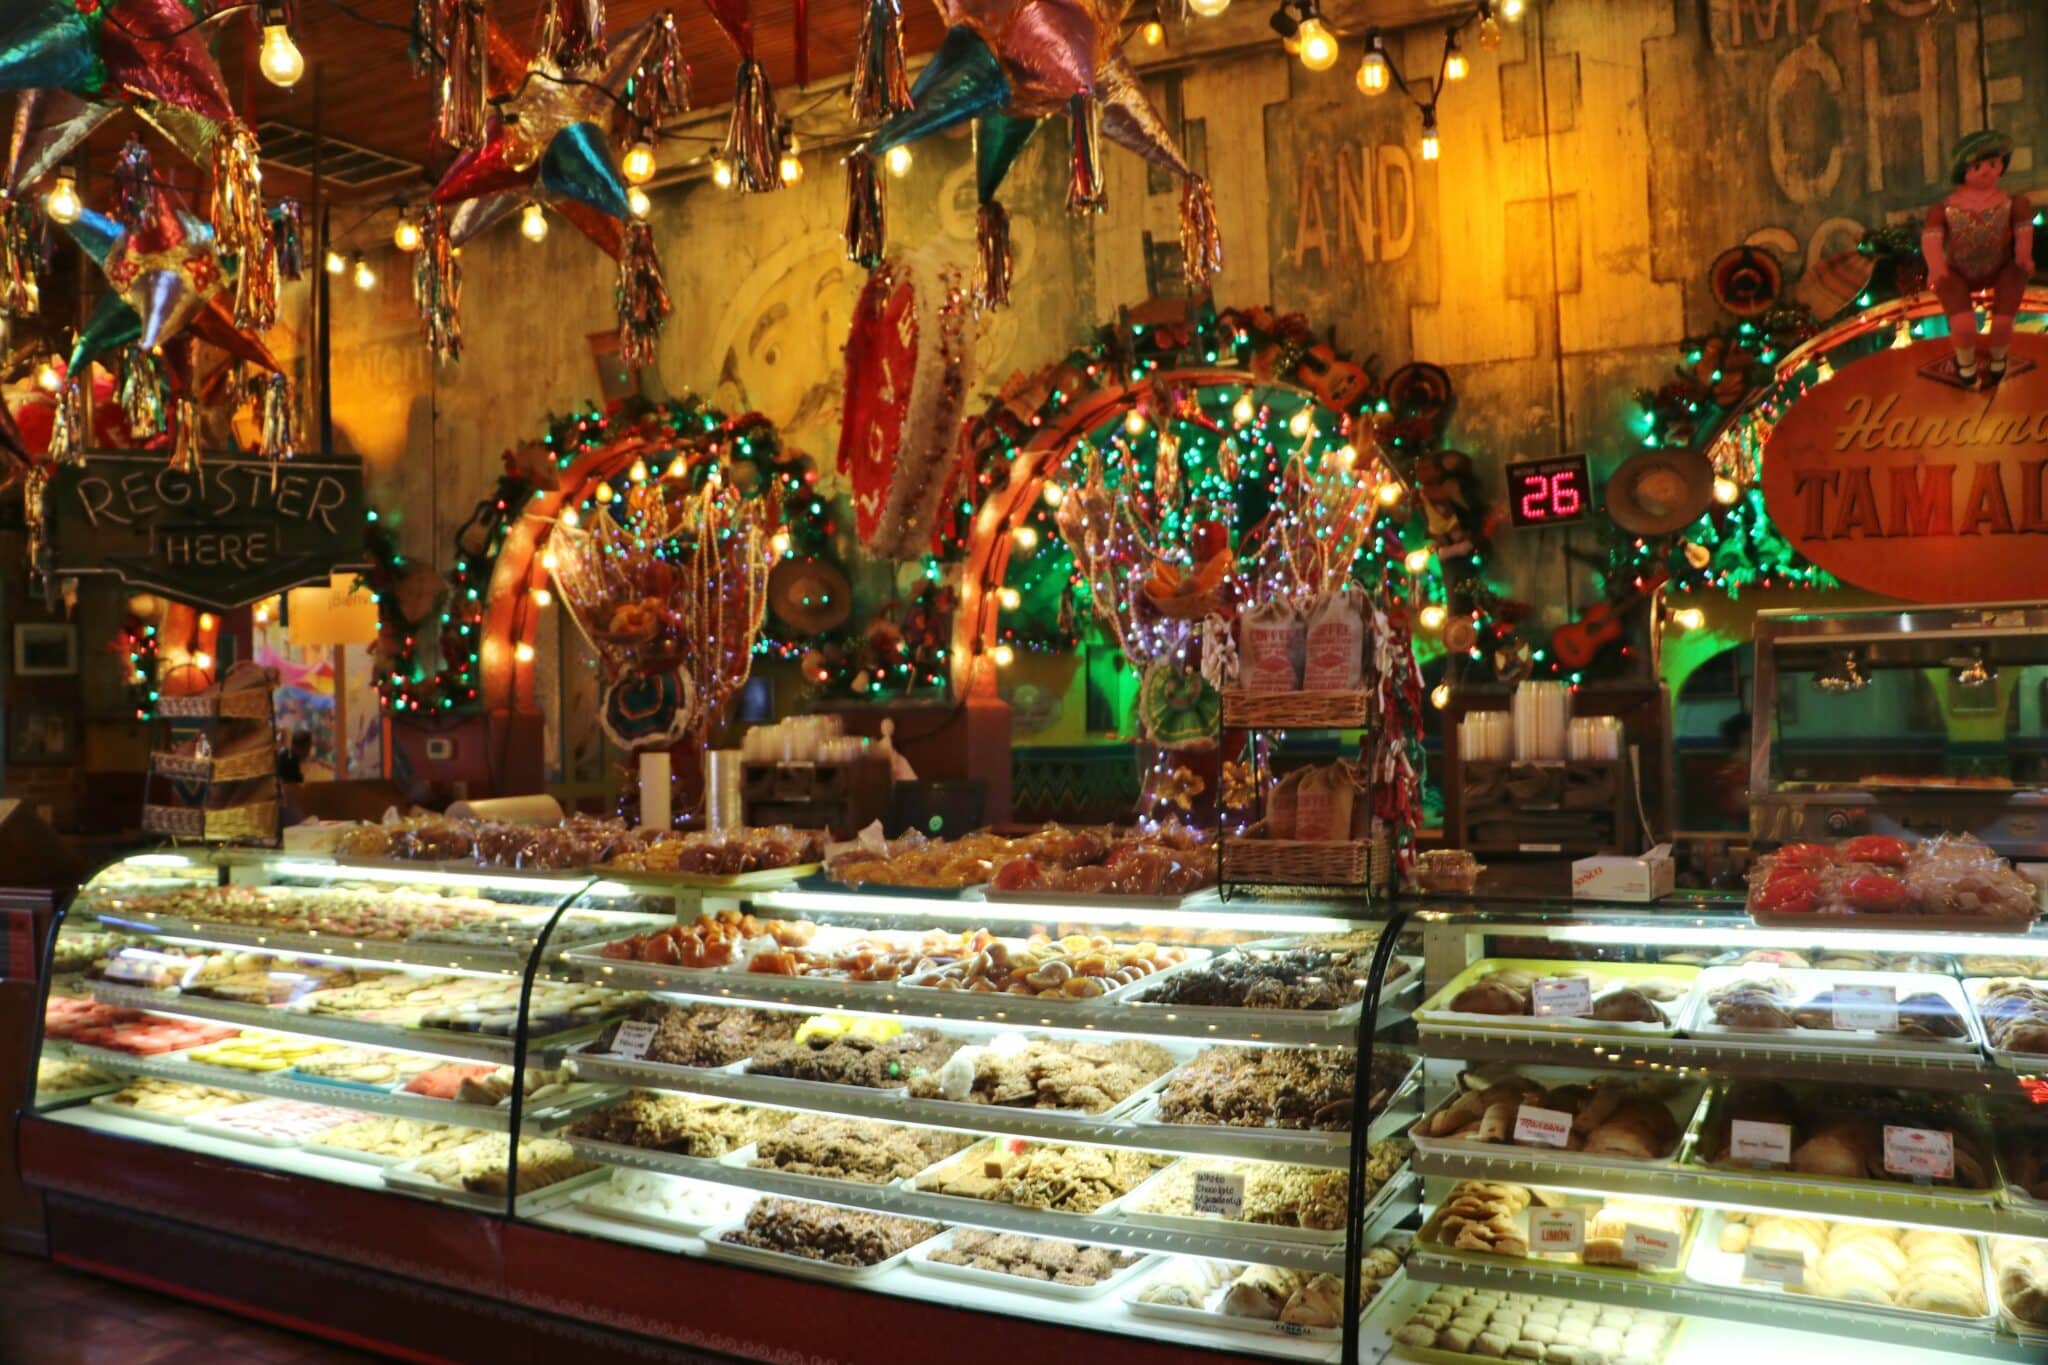 A small section of the baked goods at Mi Tierra Bakery